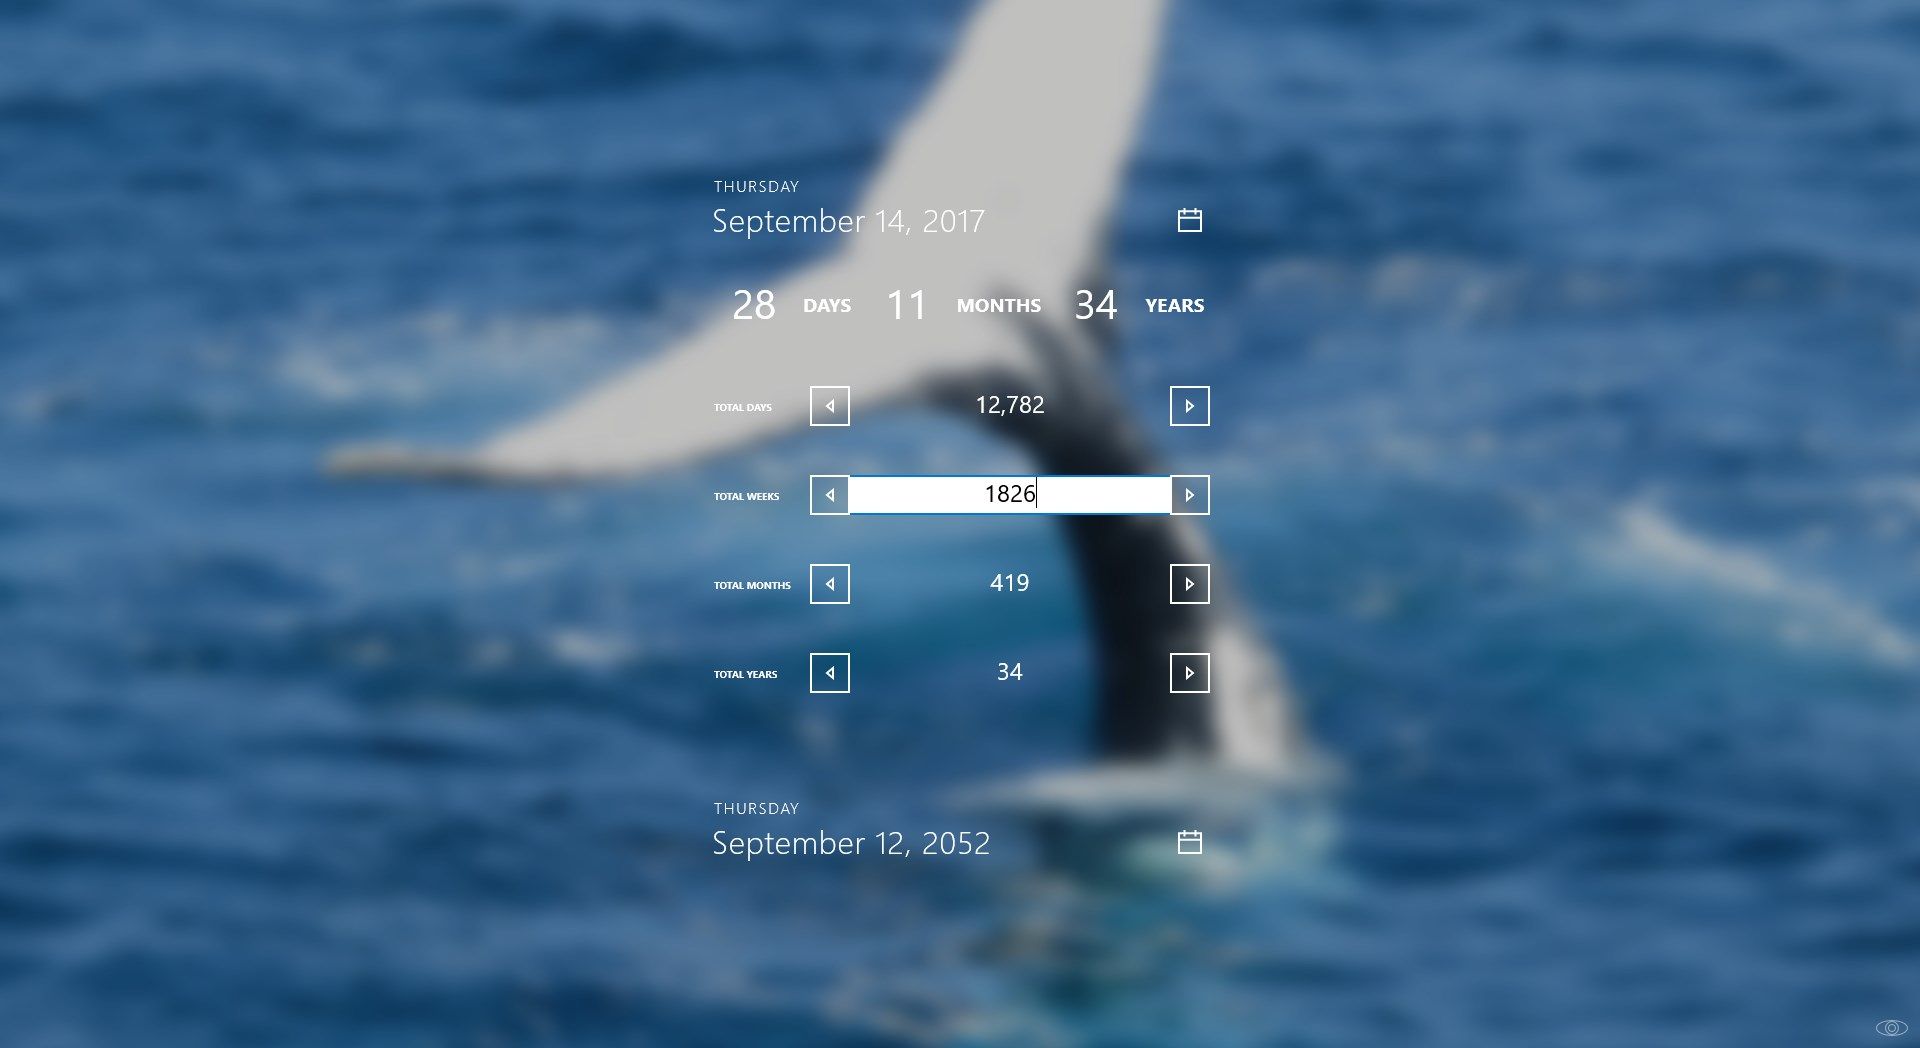 Any measure of duration can be edited to get the corresponding date (and maybe a whale!)